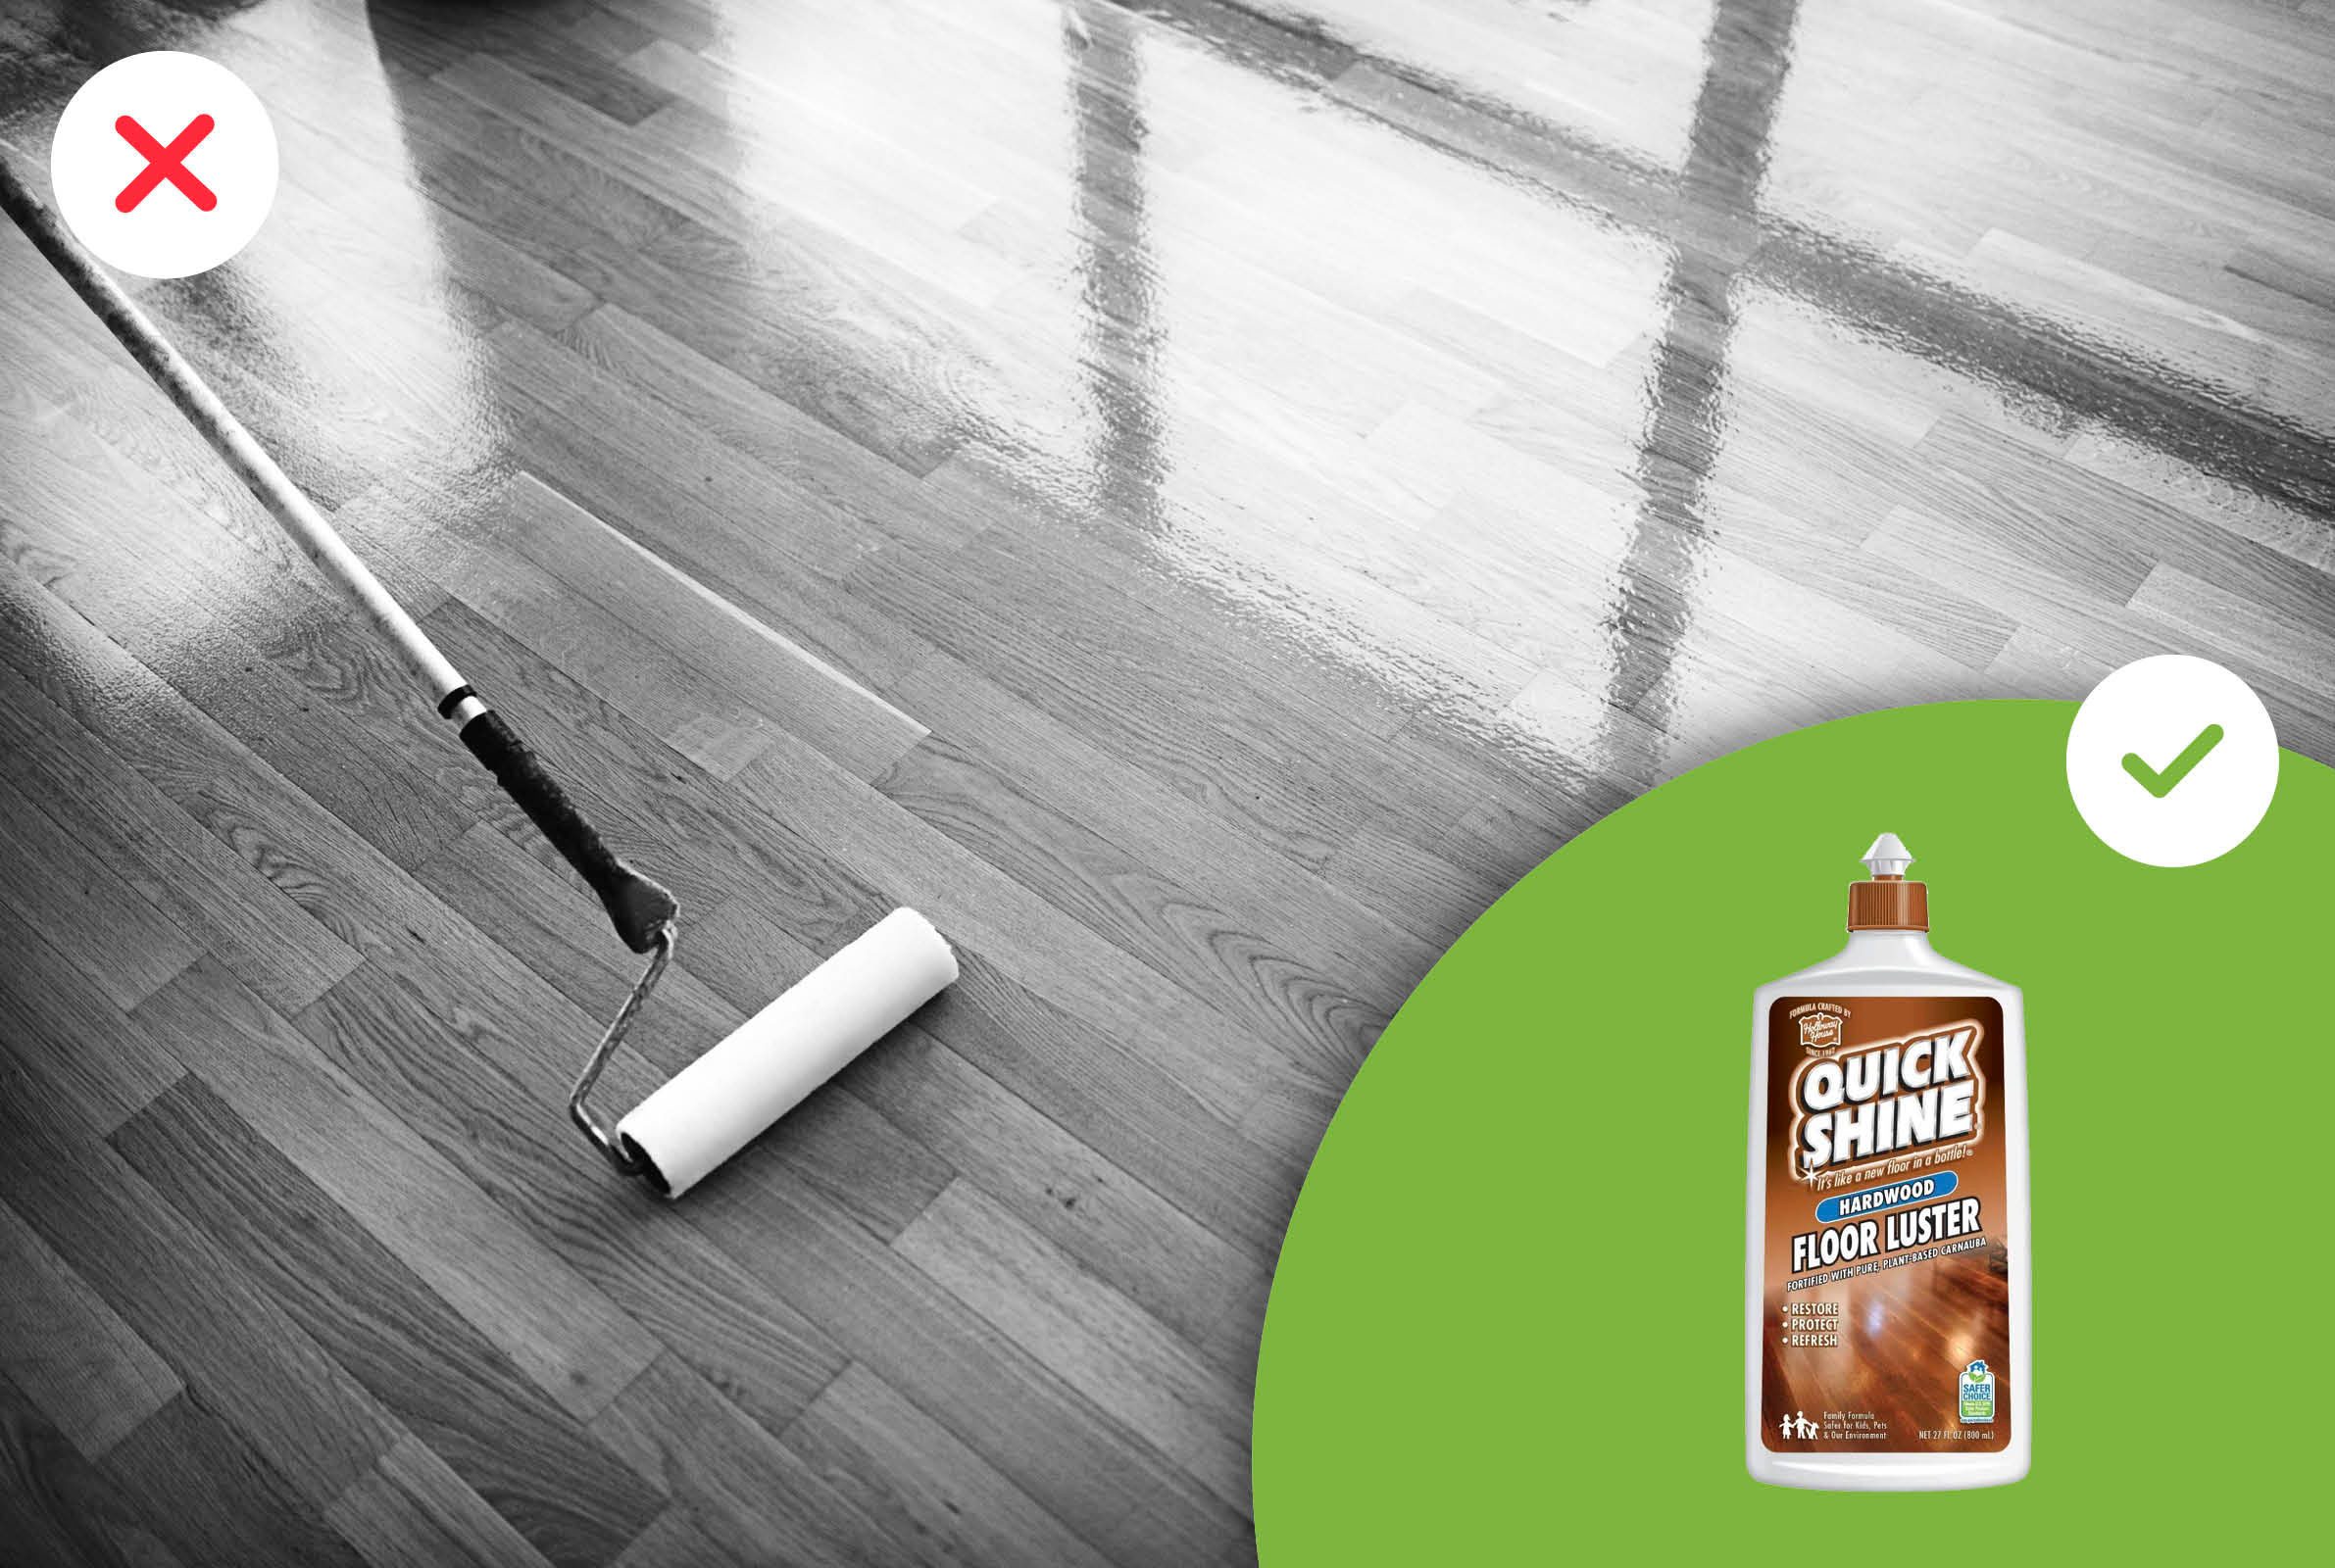 Cleaning a wooden floor